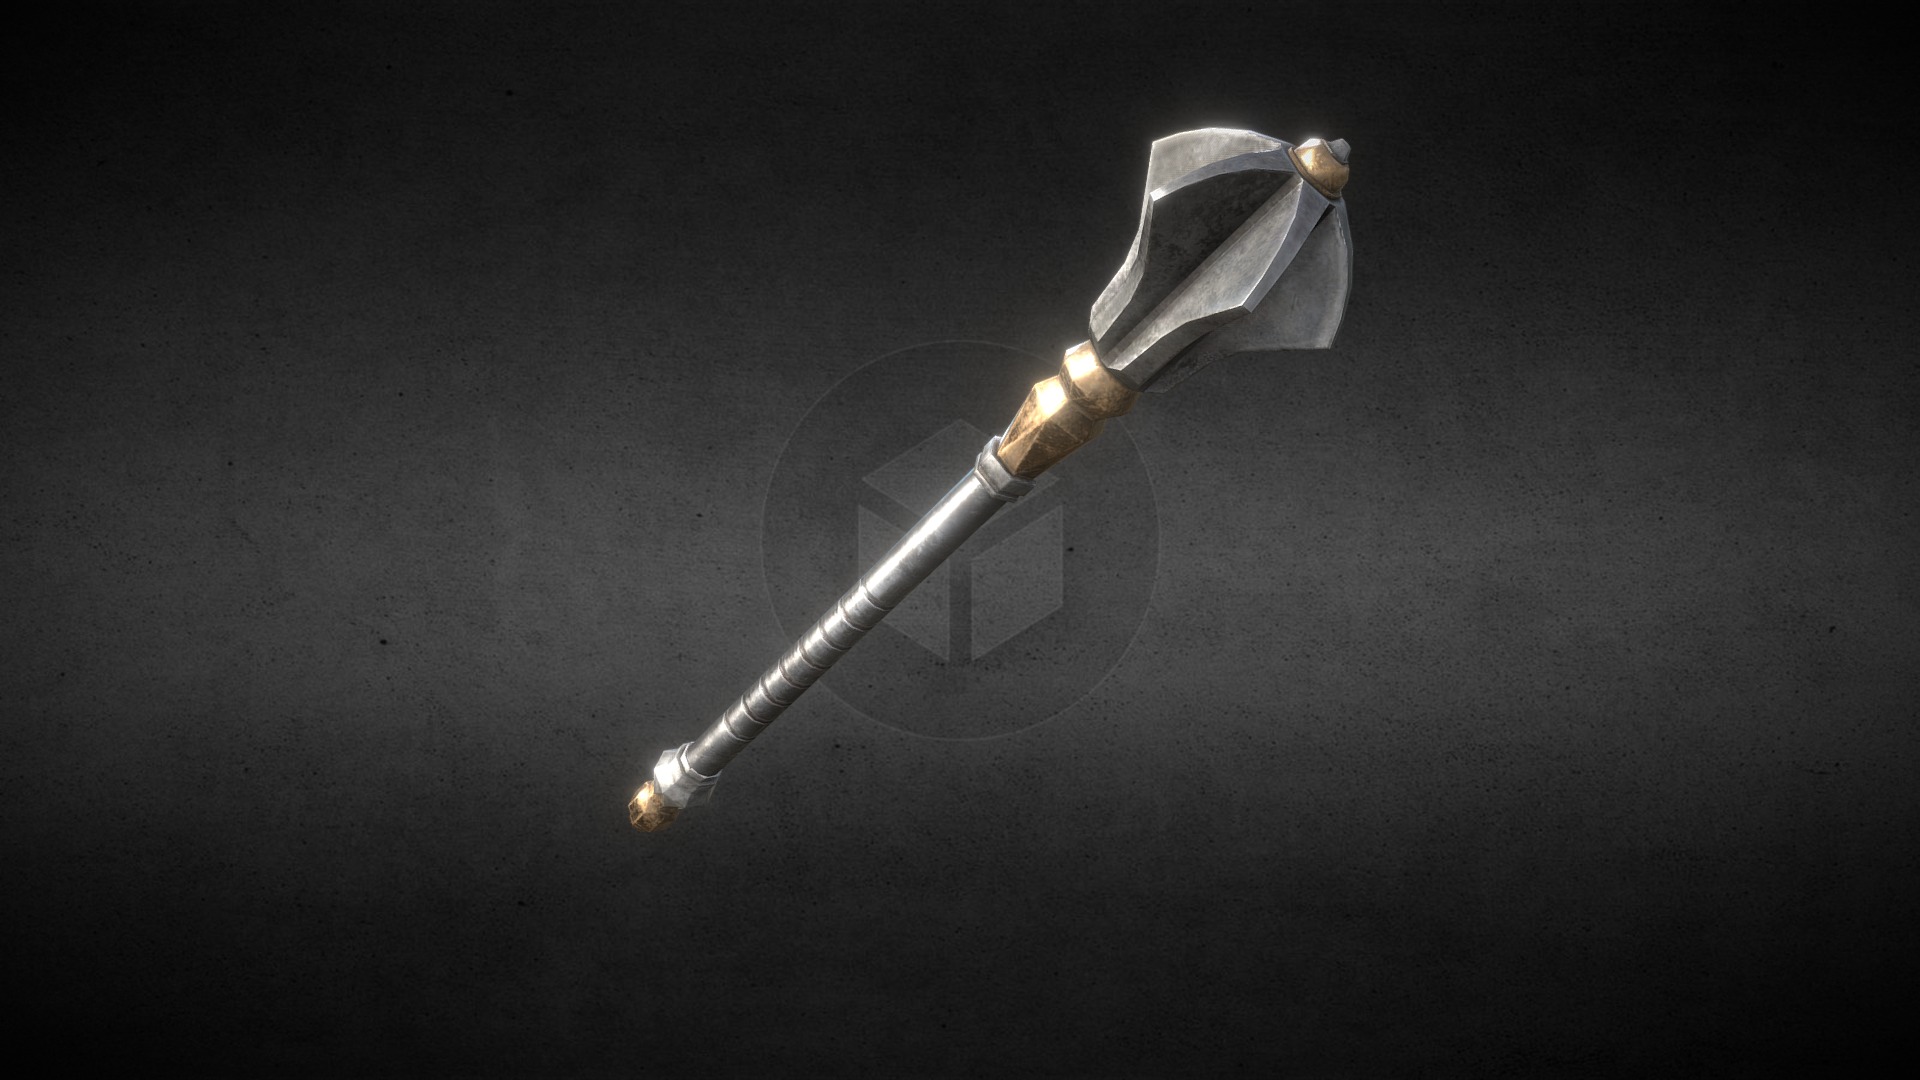 3D model Flanged Mace - This is a 3D model of the Flanged Mace. The 3D model is about a light bulb on a black surface.